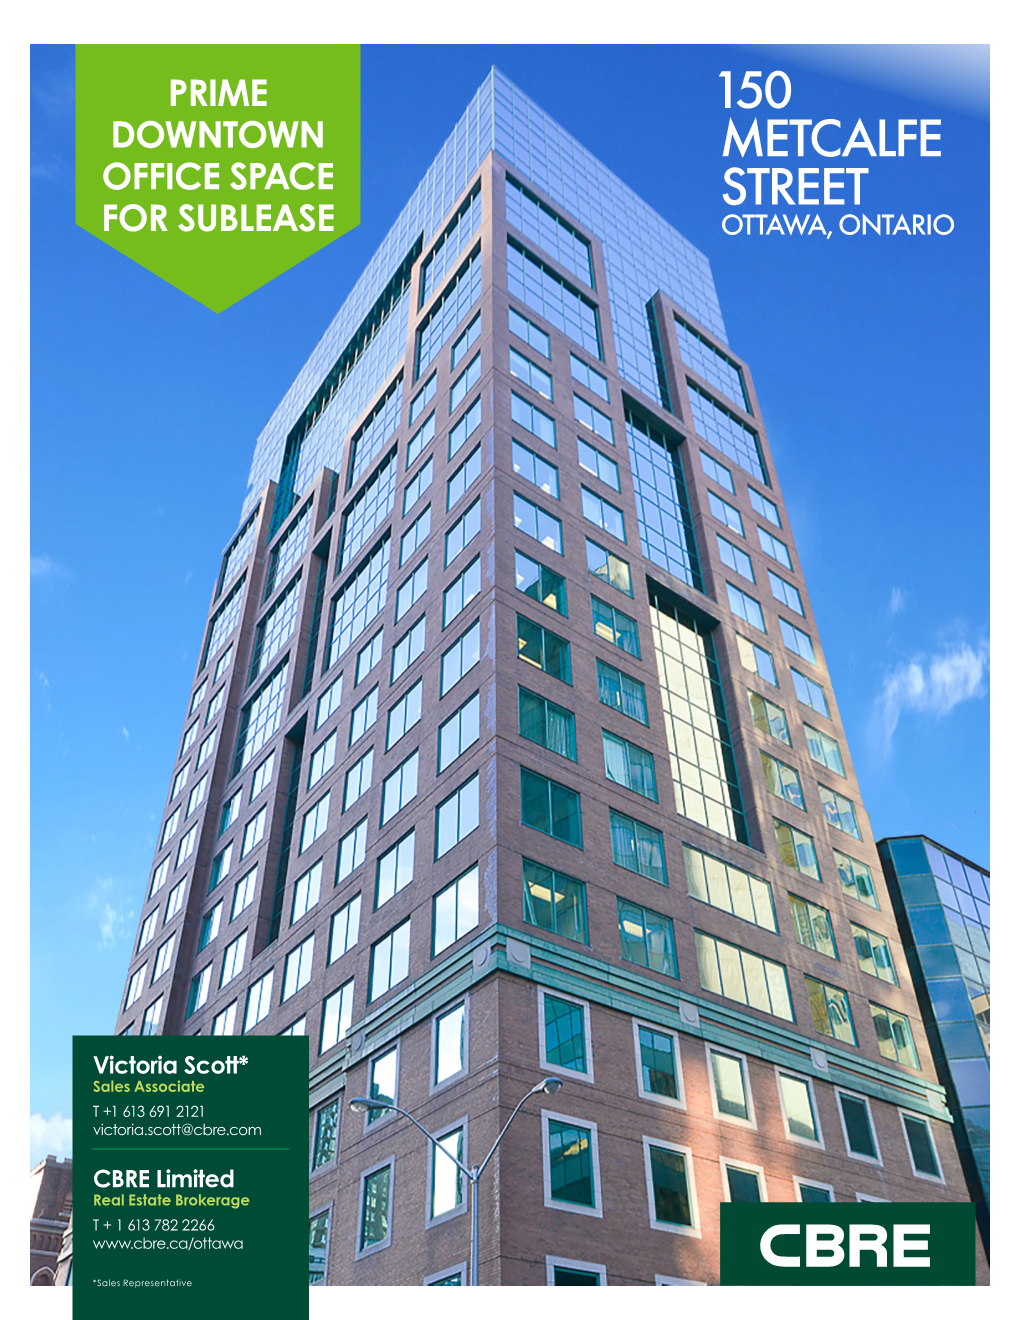 150 Metcalfe Street Provides the Class and Quality of Space in OTTAWA, ONTARIO Which Your Business Can Thrive